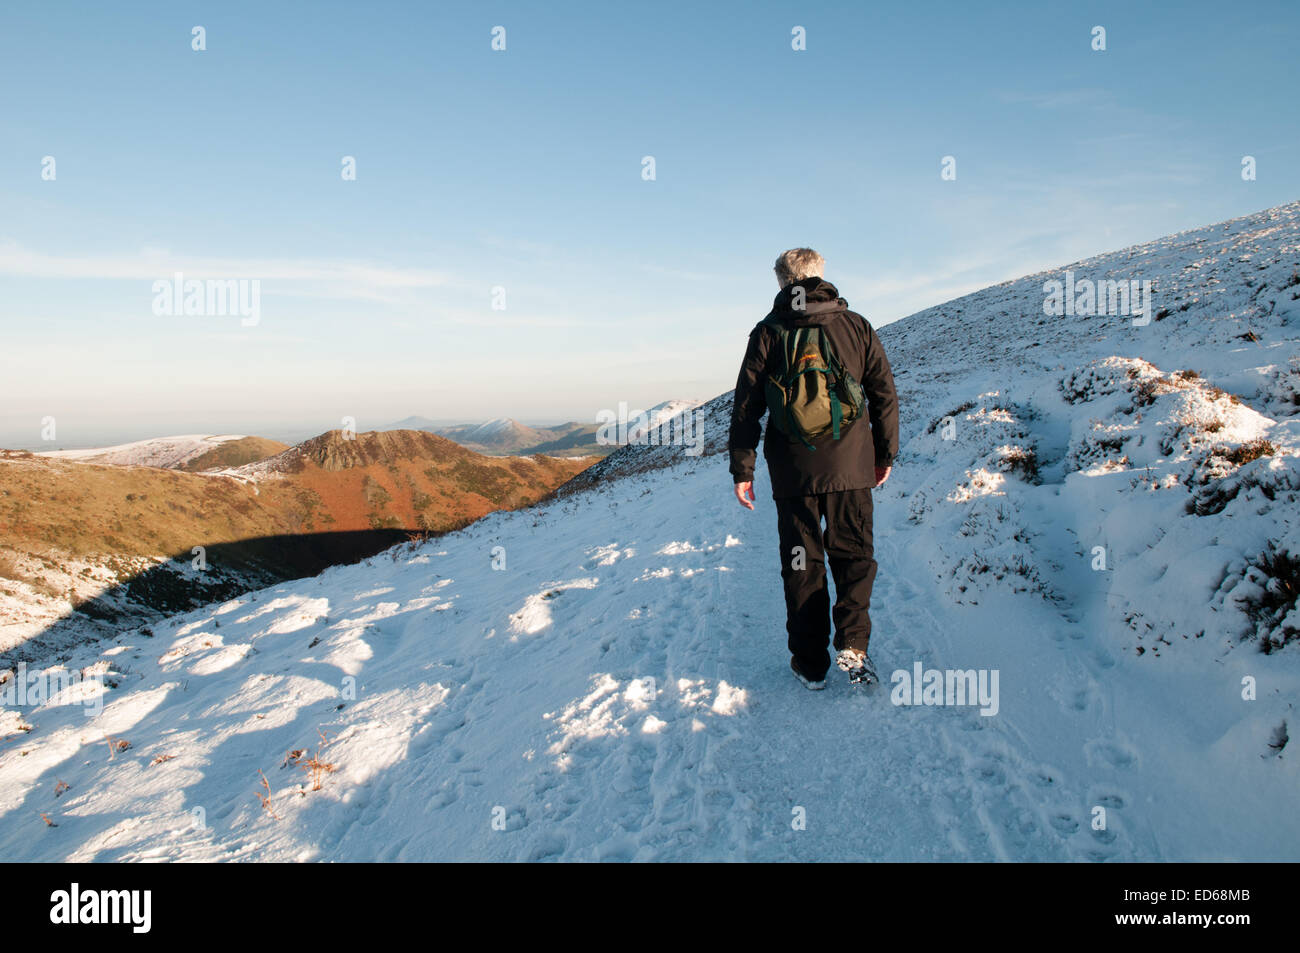 Long Mynd, Shropshire, UK. 29th December, 2014. Weather UK: Glorious winter sunshine bathes the UK giving walkers wonderful winter treks over snow-covered hills as temperatures drop below freezing as 2014 comes to an end. Here a man is walking along a snow-covered and stunning Long Mynd, in Shropshire, looking out across the snow-capped hills on a wonderful winter's day walk. Credit:  Jane Williams/Alamy Live News Stock Photo